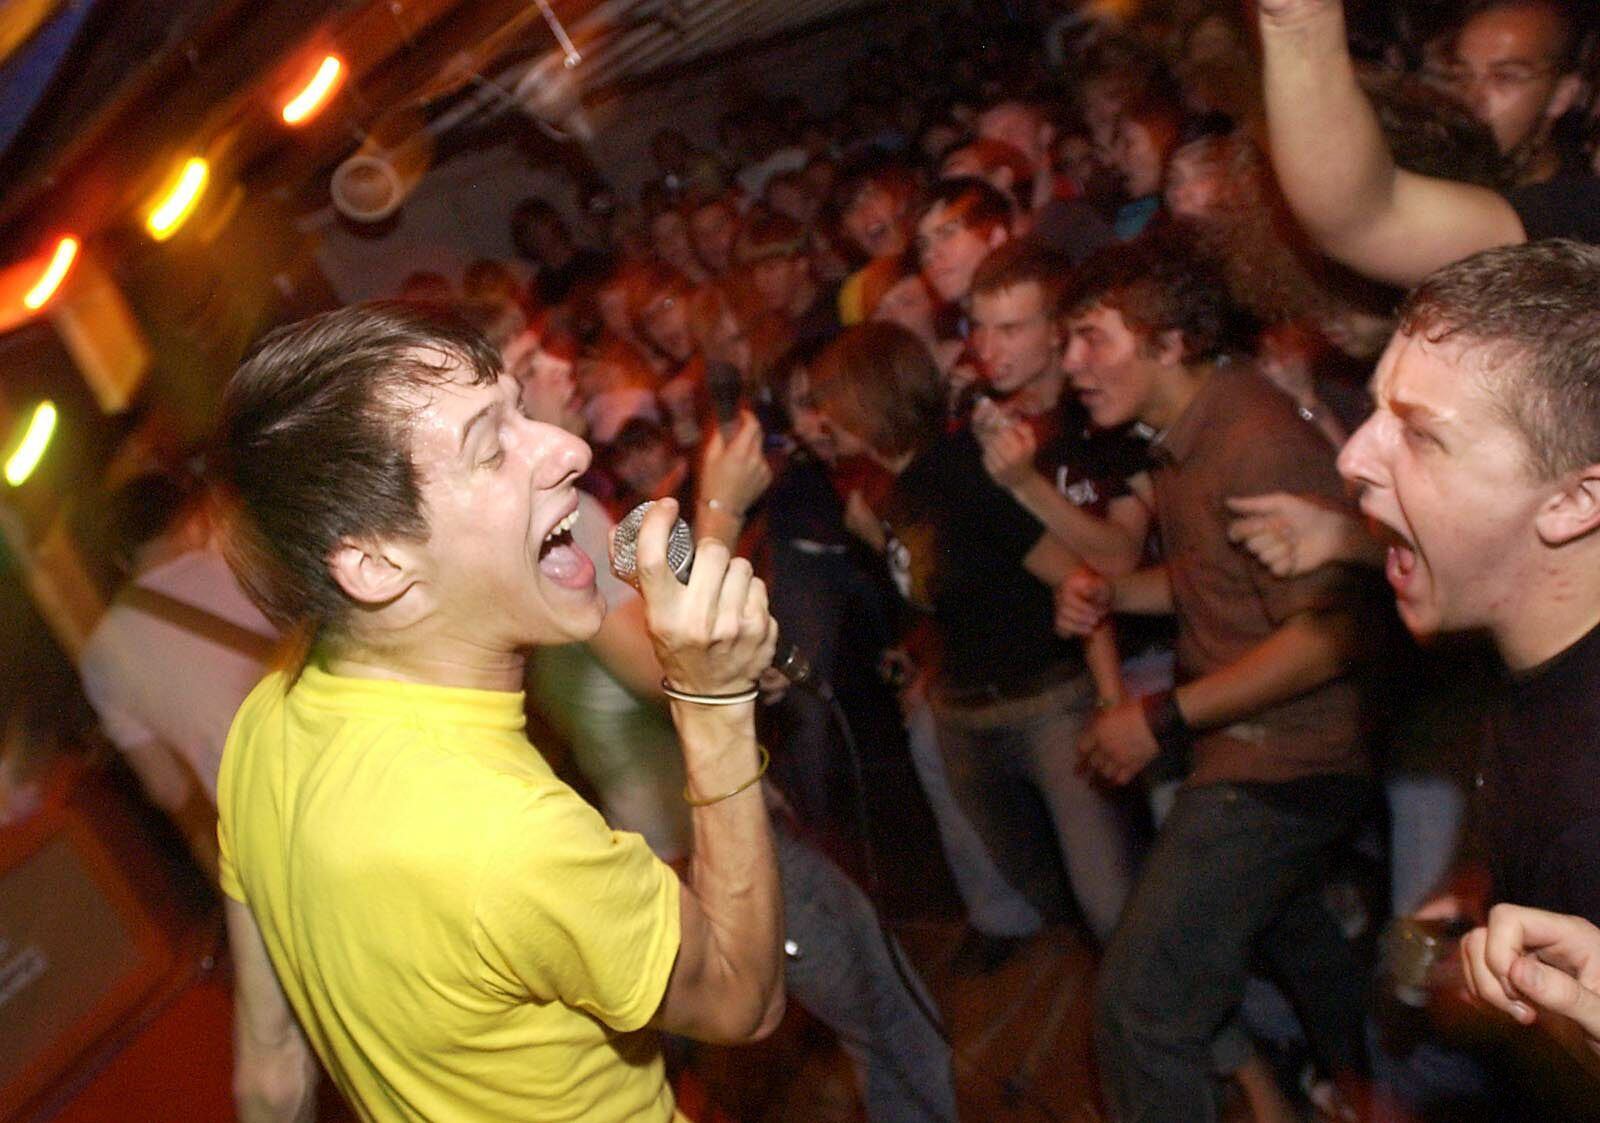 Salt Lake City - The Blood Broythers on stage as fans go wild at Kilby Court, an all-ages garage-turned music venue.

Ryan Galbraith
07/19/04